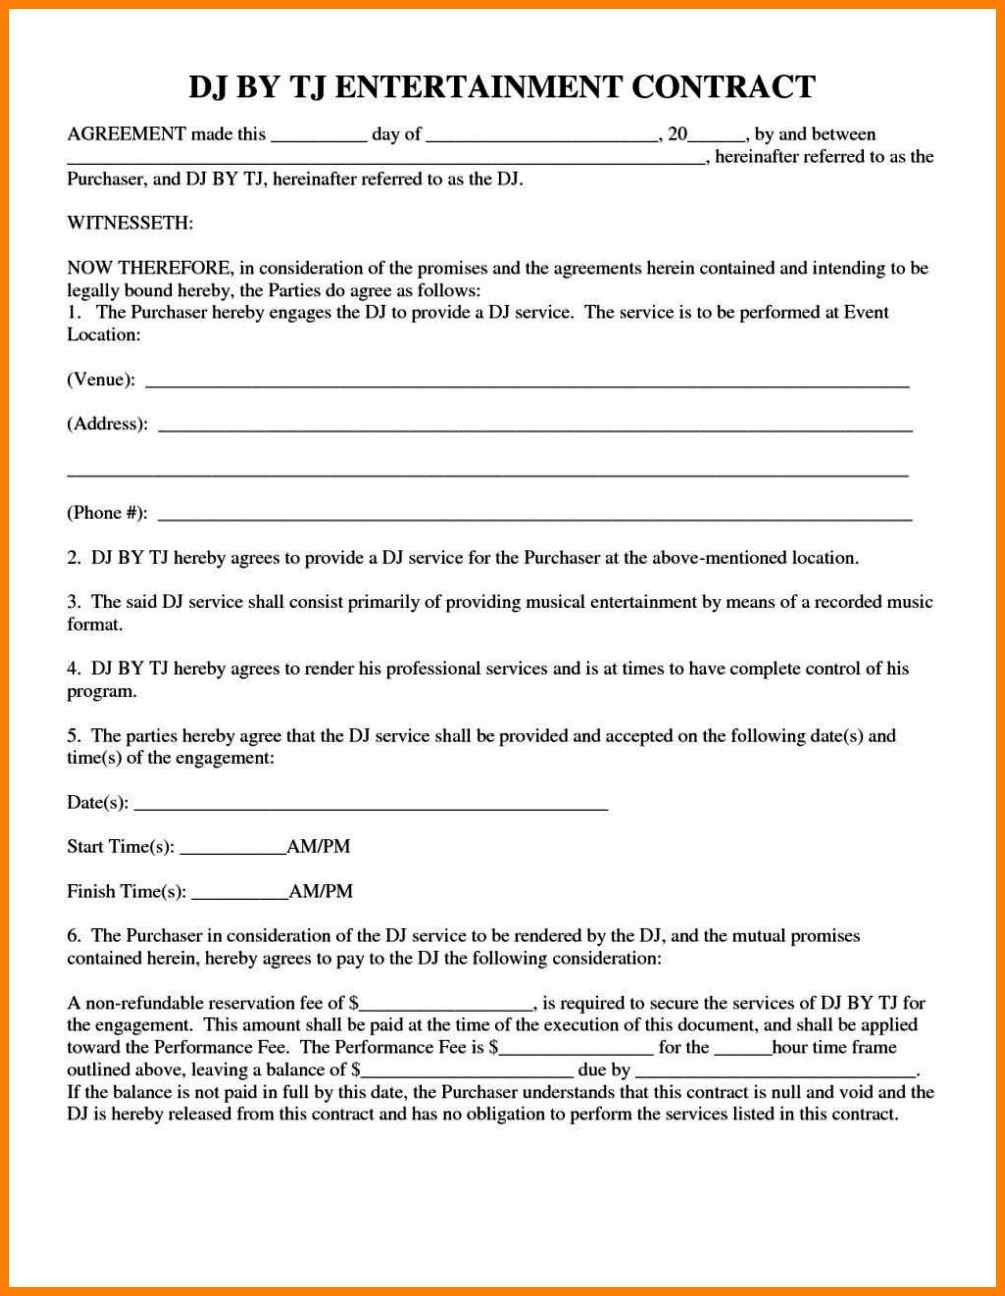 11 Entertainment Contracts Templates Business Opportunity Program Document Contract Template